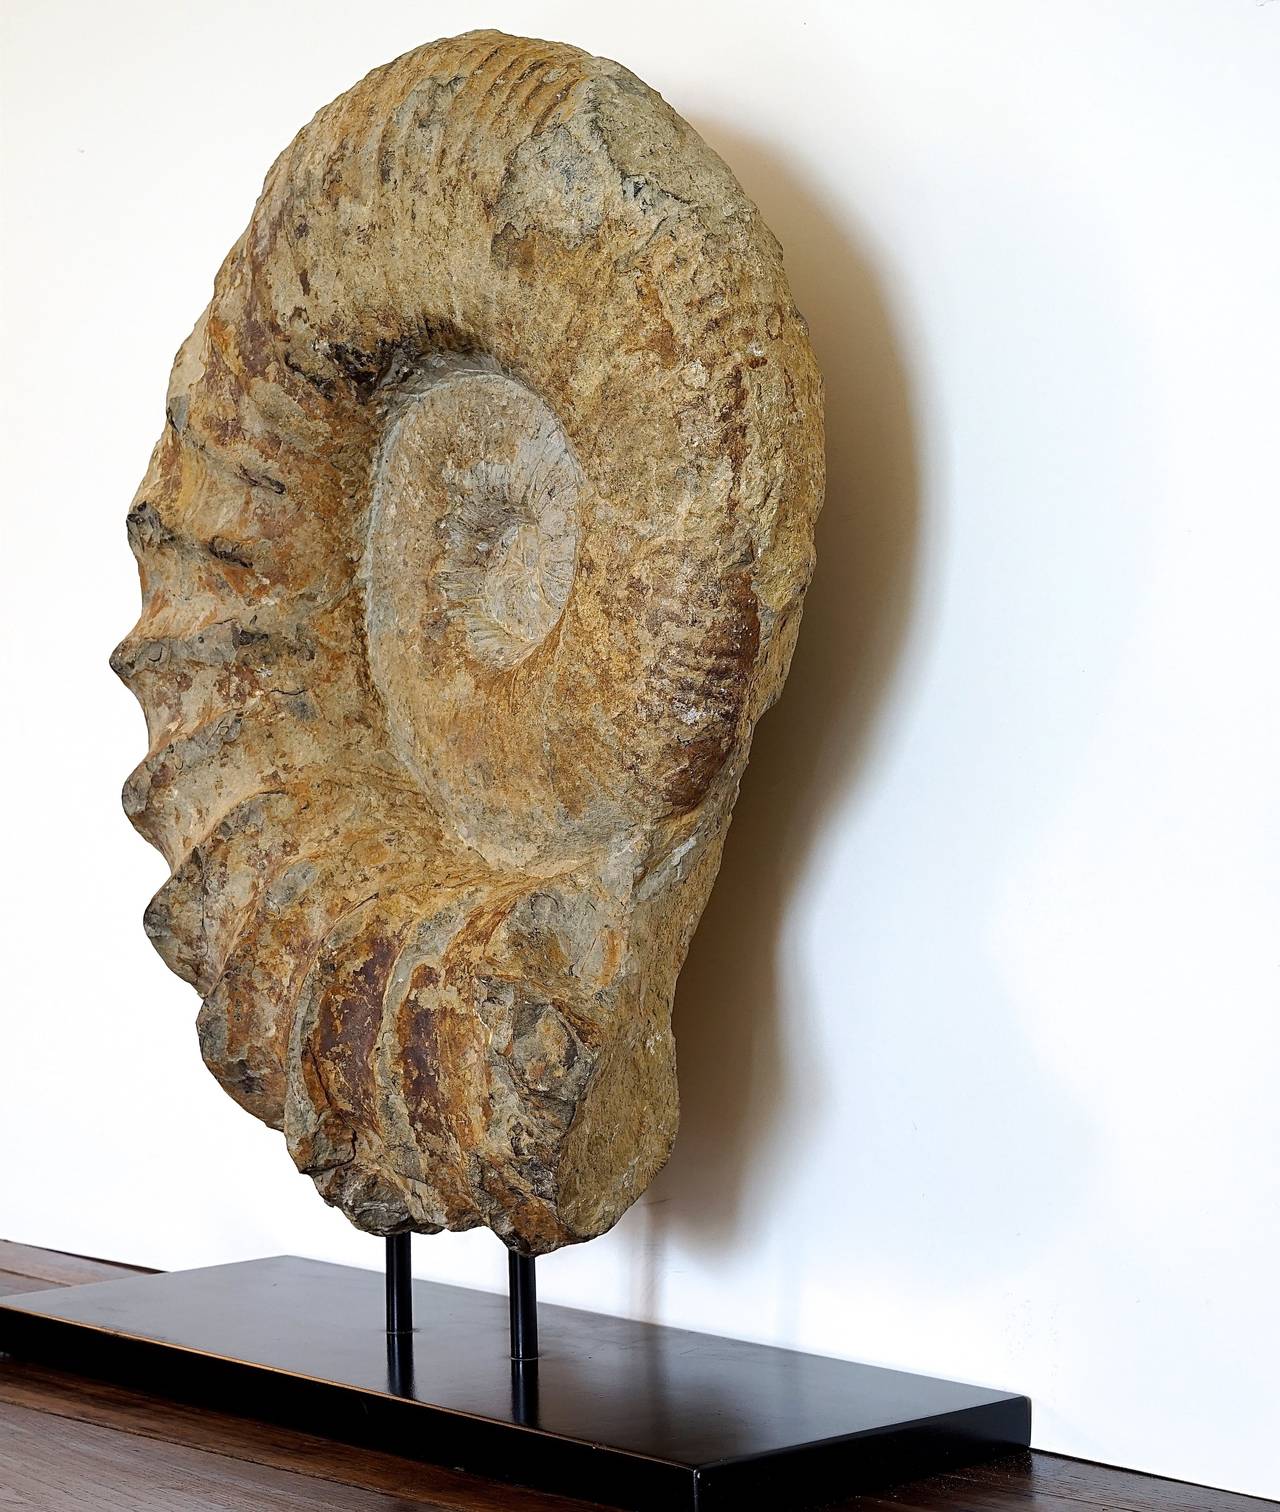 This monumental Parapuzosia Seppenradensis Ammonite fossil of French white limestone is mounted on a painted steel base (black) was created 65 million years ago during the late Cretaceous-Tertiary period mass extinction.
Ammonites are an extinct